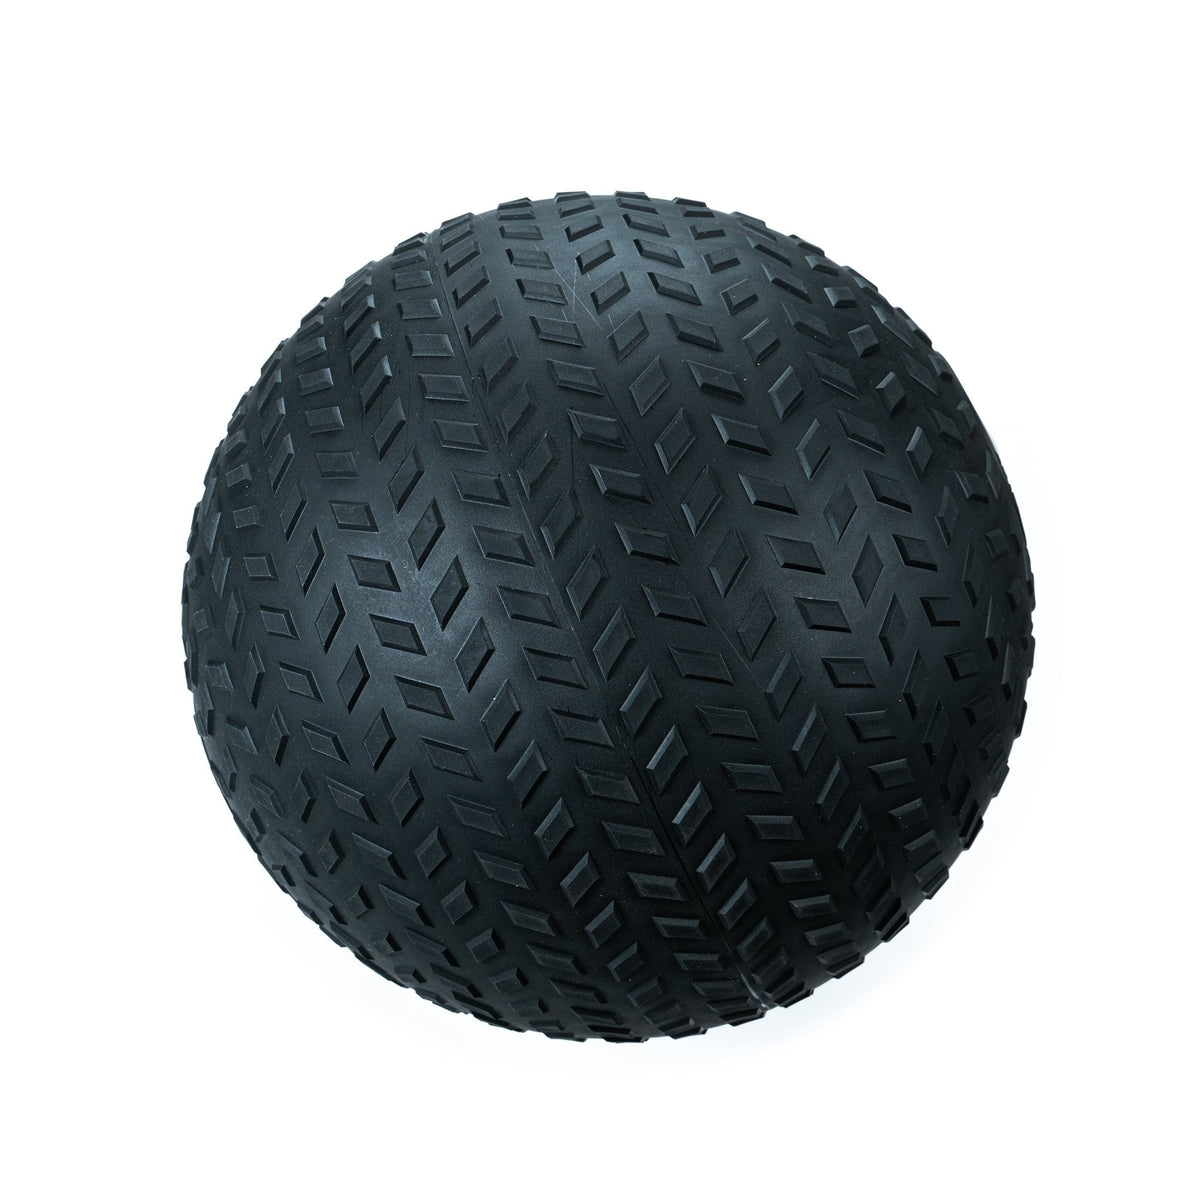 FitWay Equip. Max Grip Slam Ball - 20 Lbs - Fitness Experience